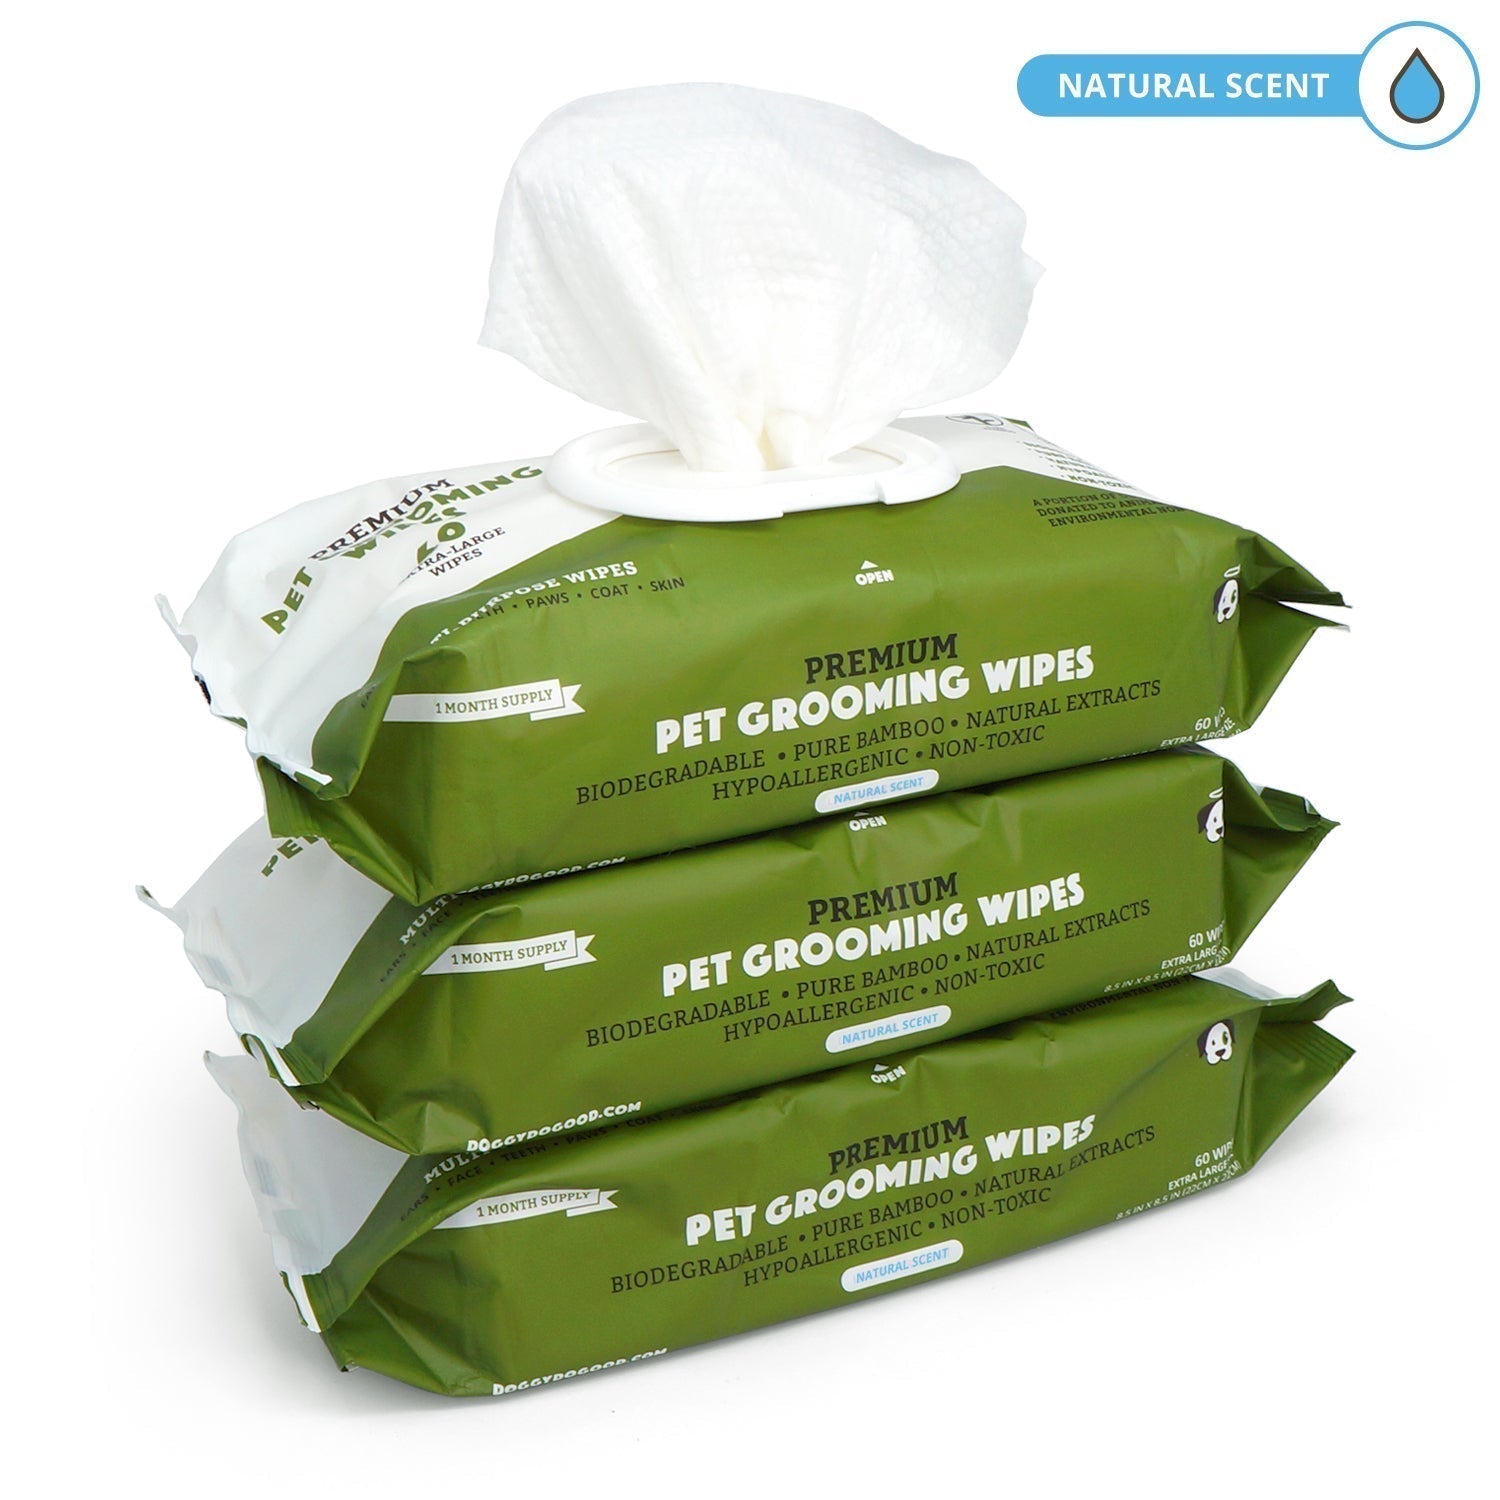 Biodegradable Grooming Wipes - Natural Scent (180 Count)